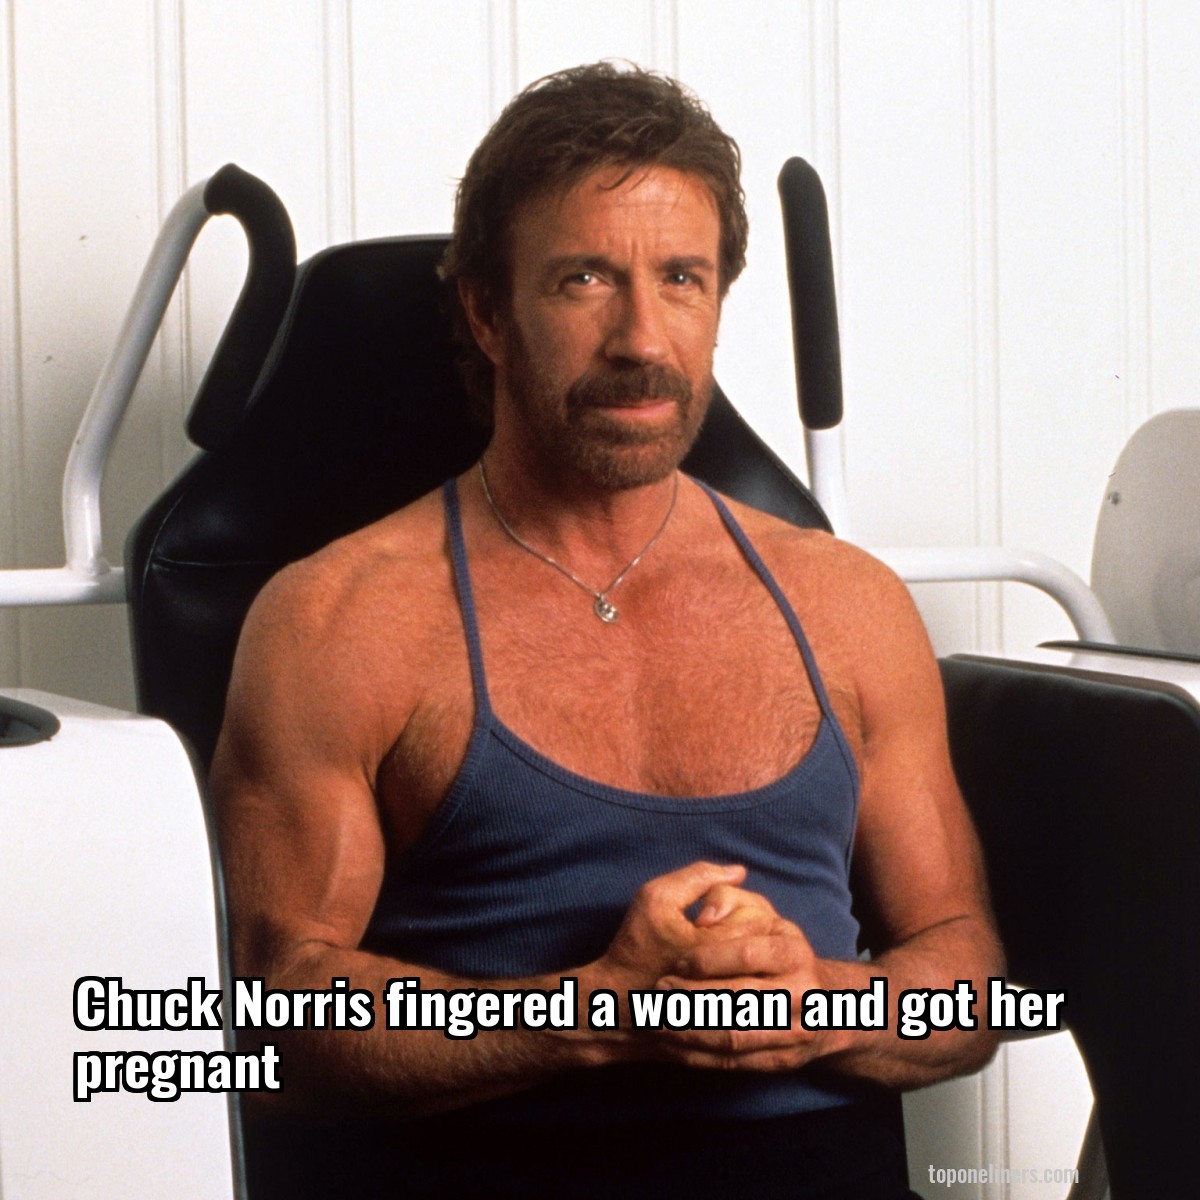 Chuck Norris fingered a woman and got her pregnant